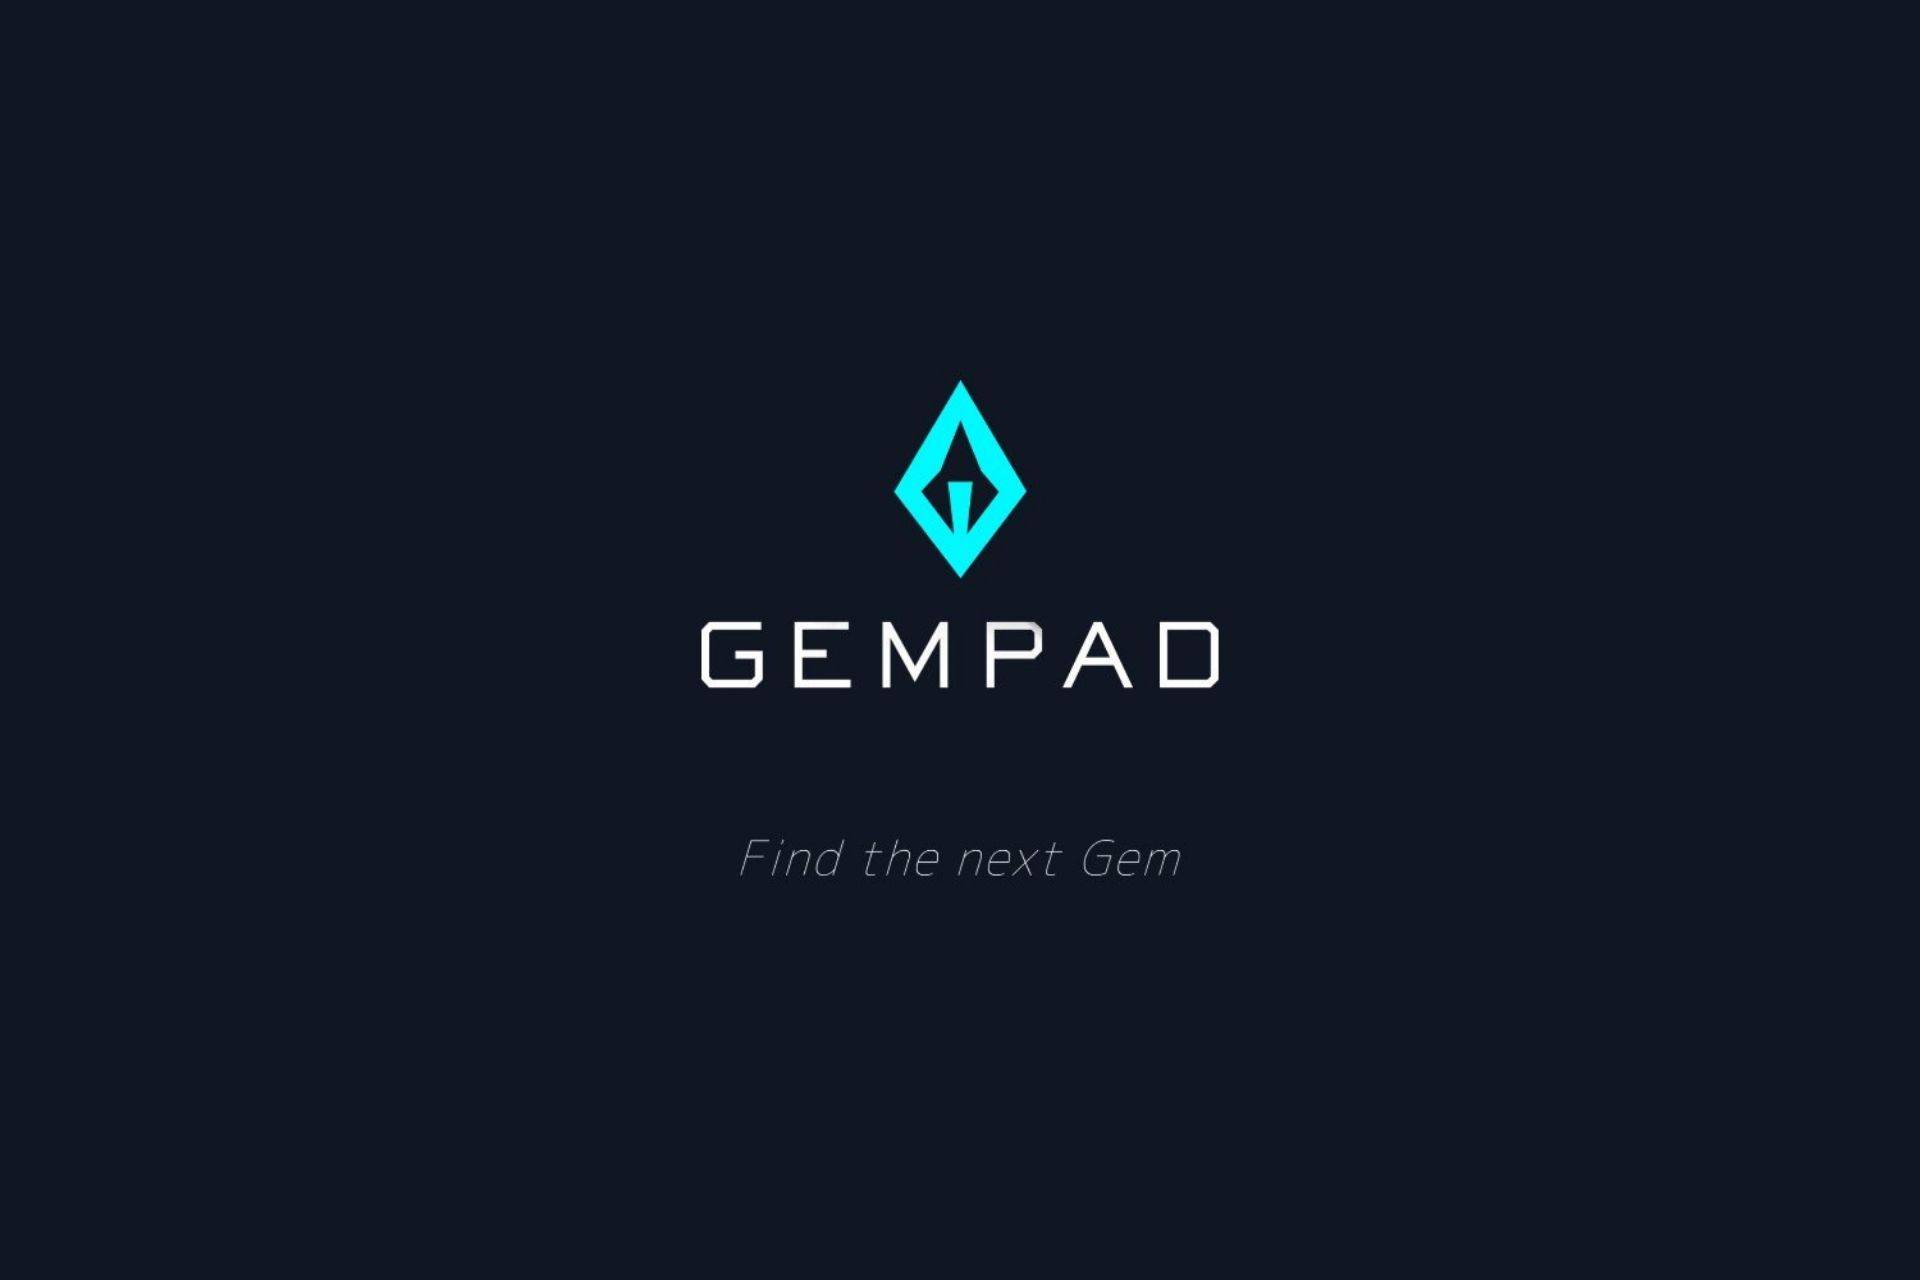 GemPad has been Successfully Listed on CoinMarketCap With New Platforms Available On Launchpad, New Features, Special Sale And Tier Structure